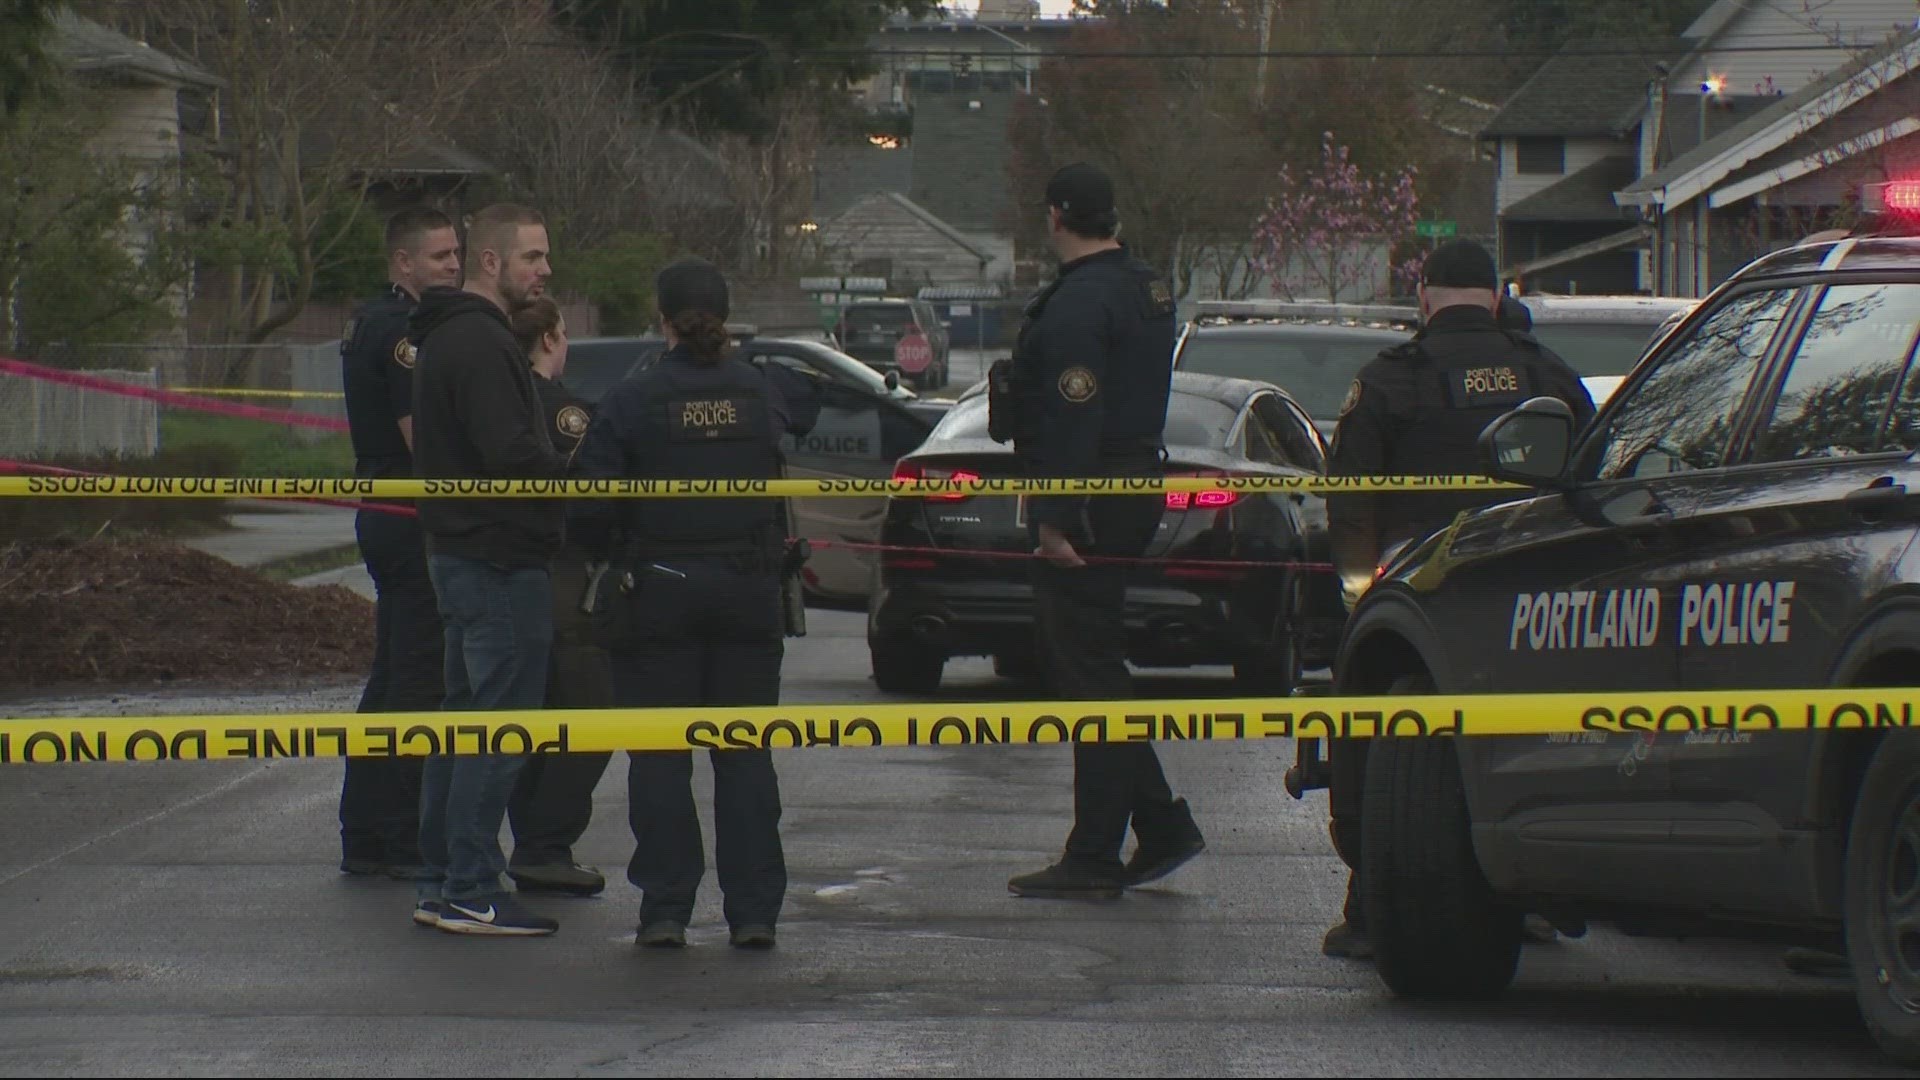 Just before 6 p.m. Portland police responded to reports of a shooting near Southeast Ramona and 84th.